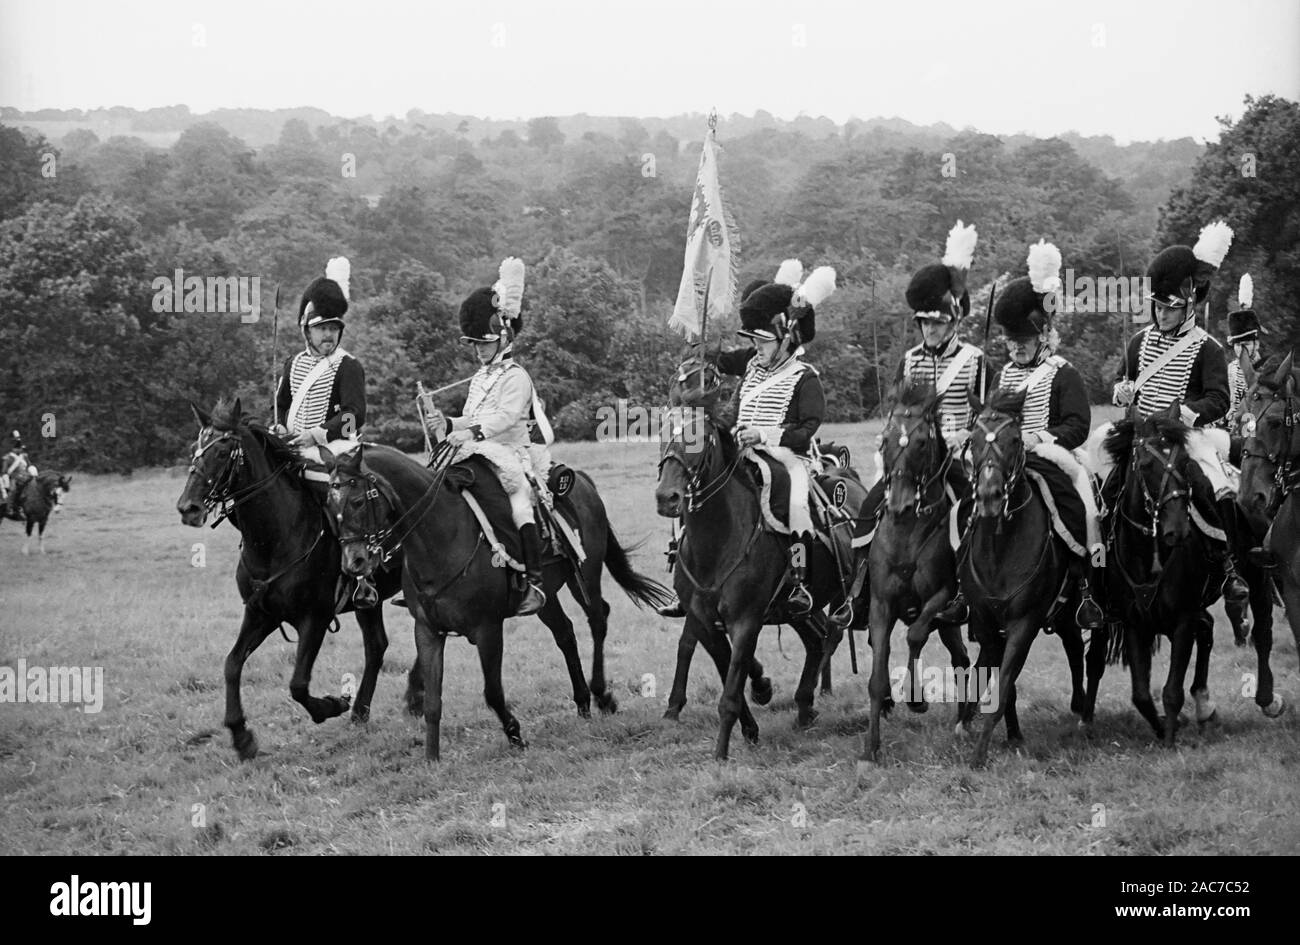 Re-enactment of a Napoleonic War battle in the grounds of Battle Abbey, East Sussex by the Napoleonic Association: a cavalry troop in action.  Circa 1994 Stock Photo